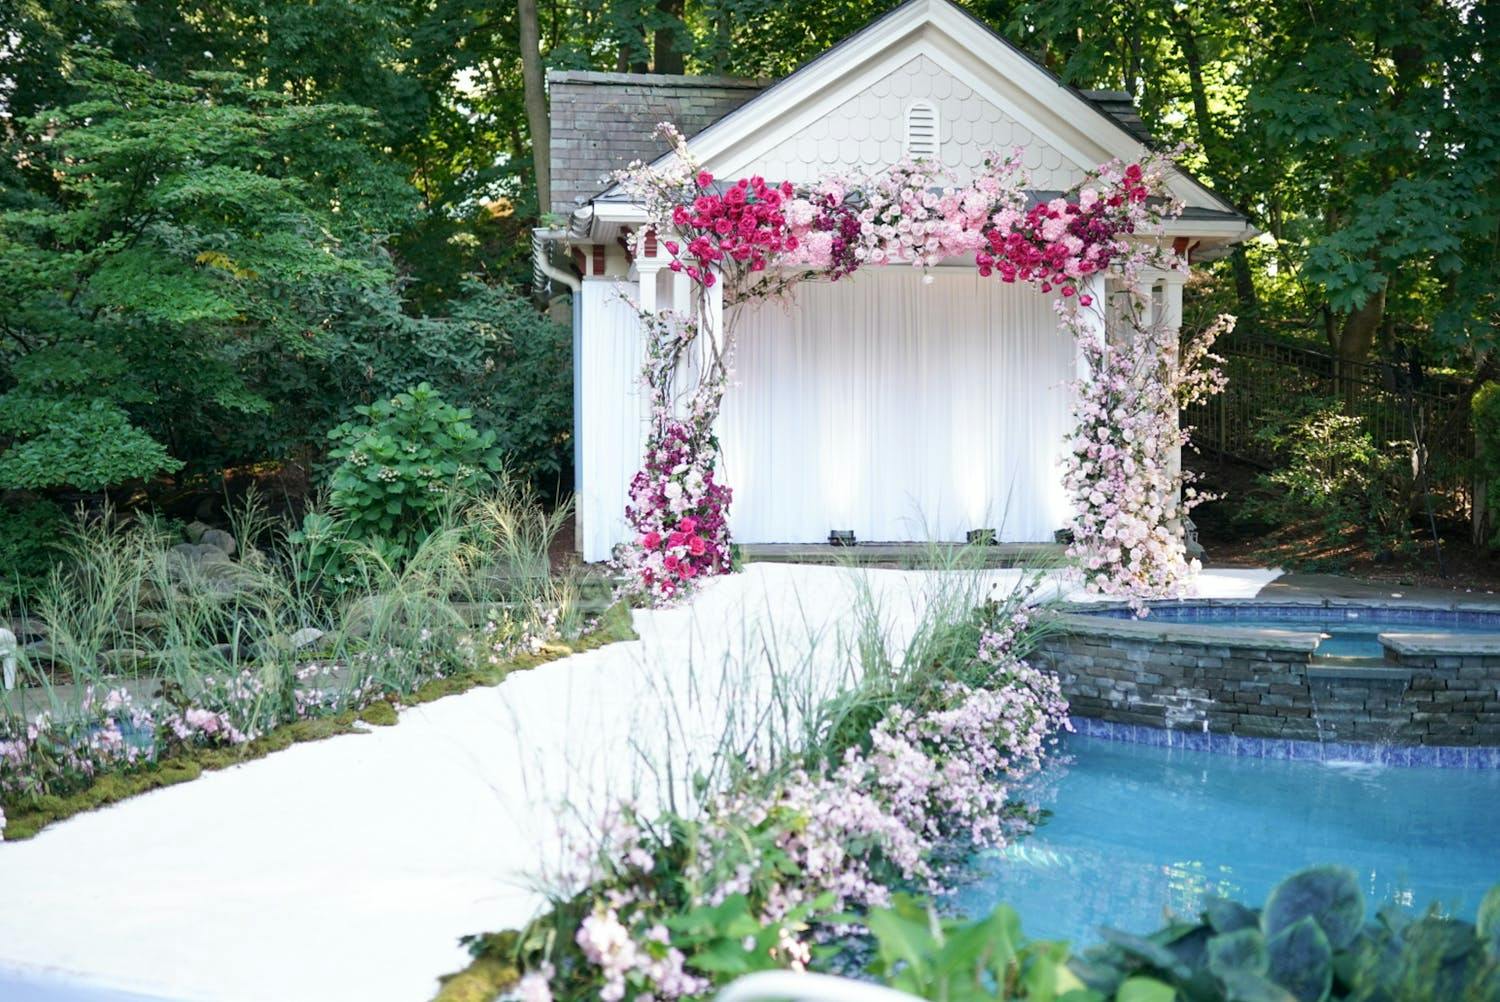 Backyard wedding with white aisle running alongside inground pool and pink floral arch against small white building | PartySlate